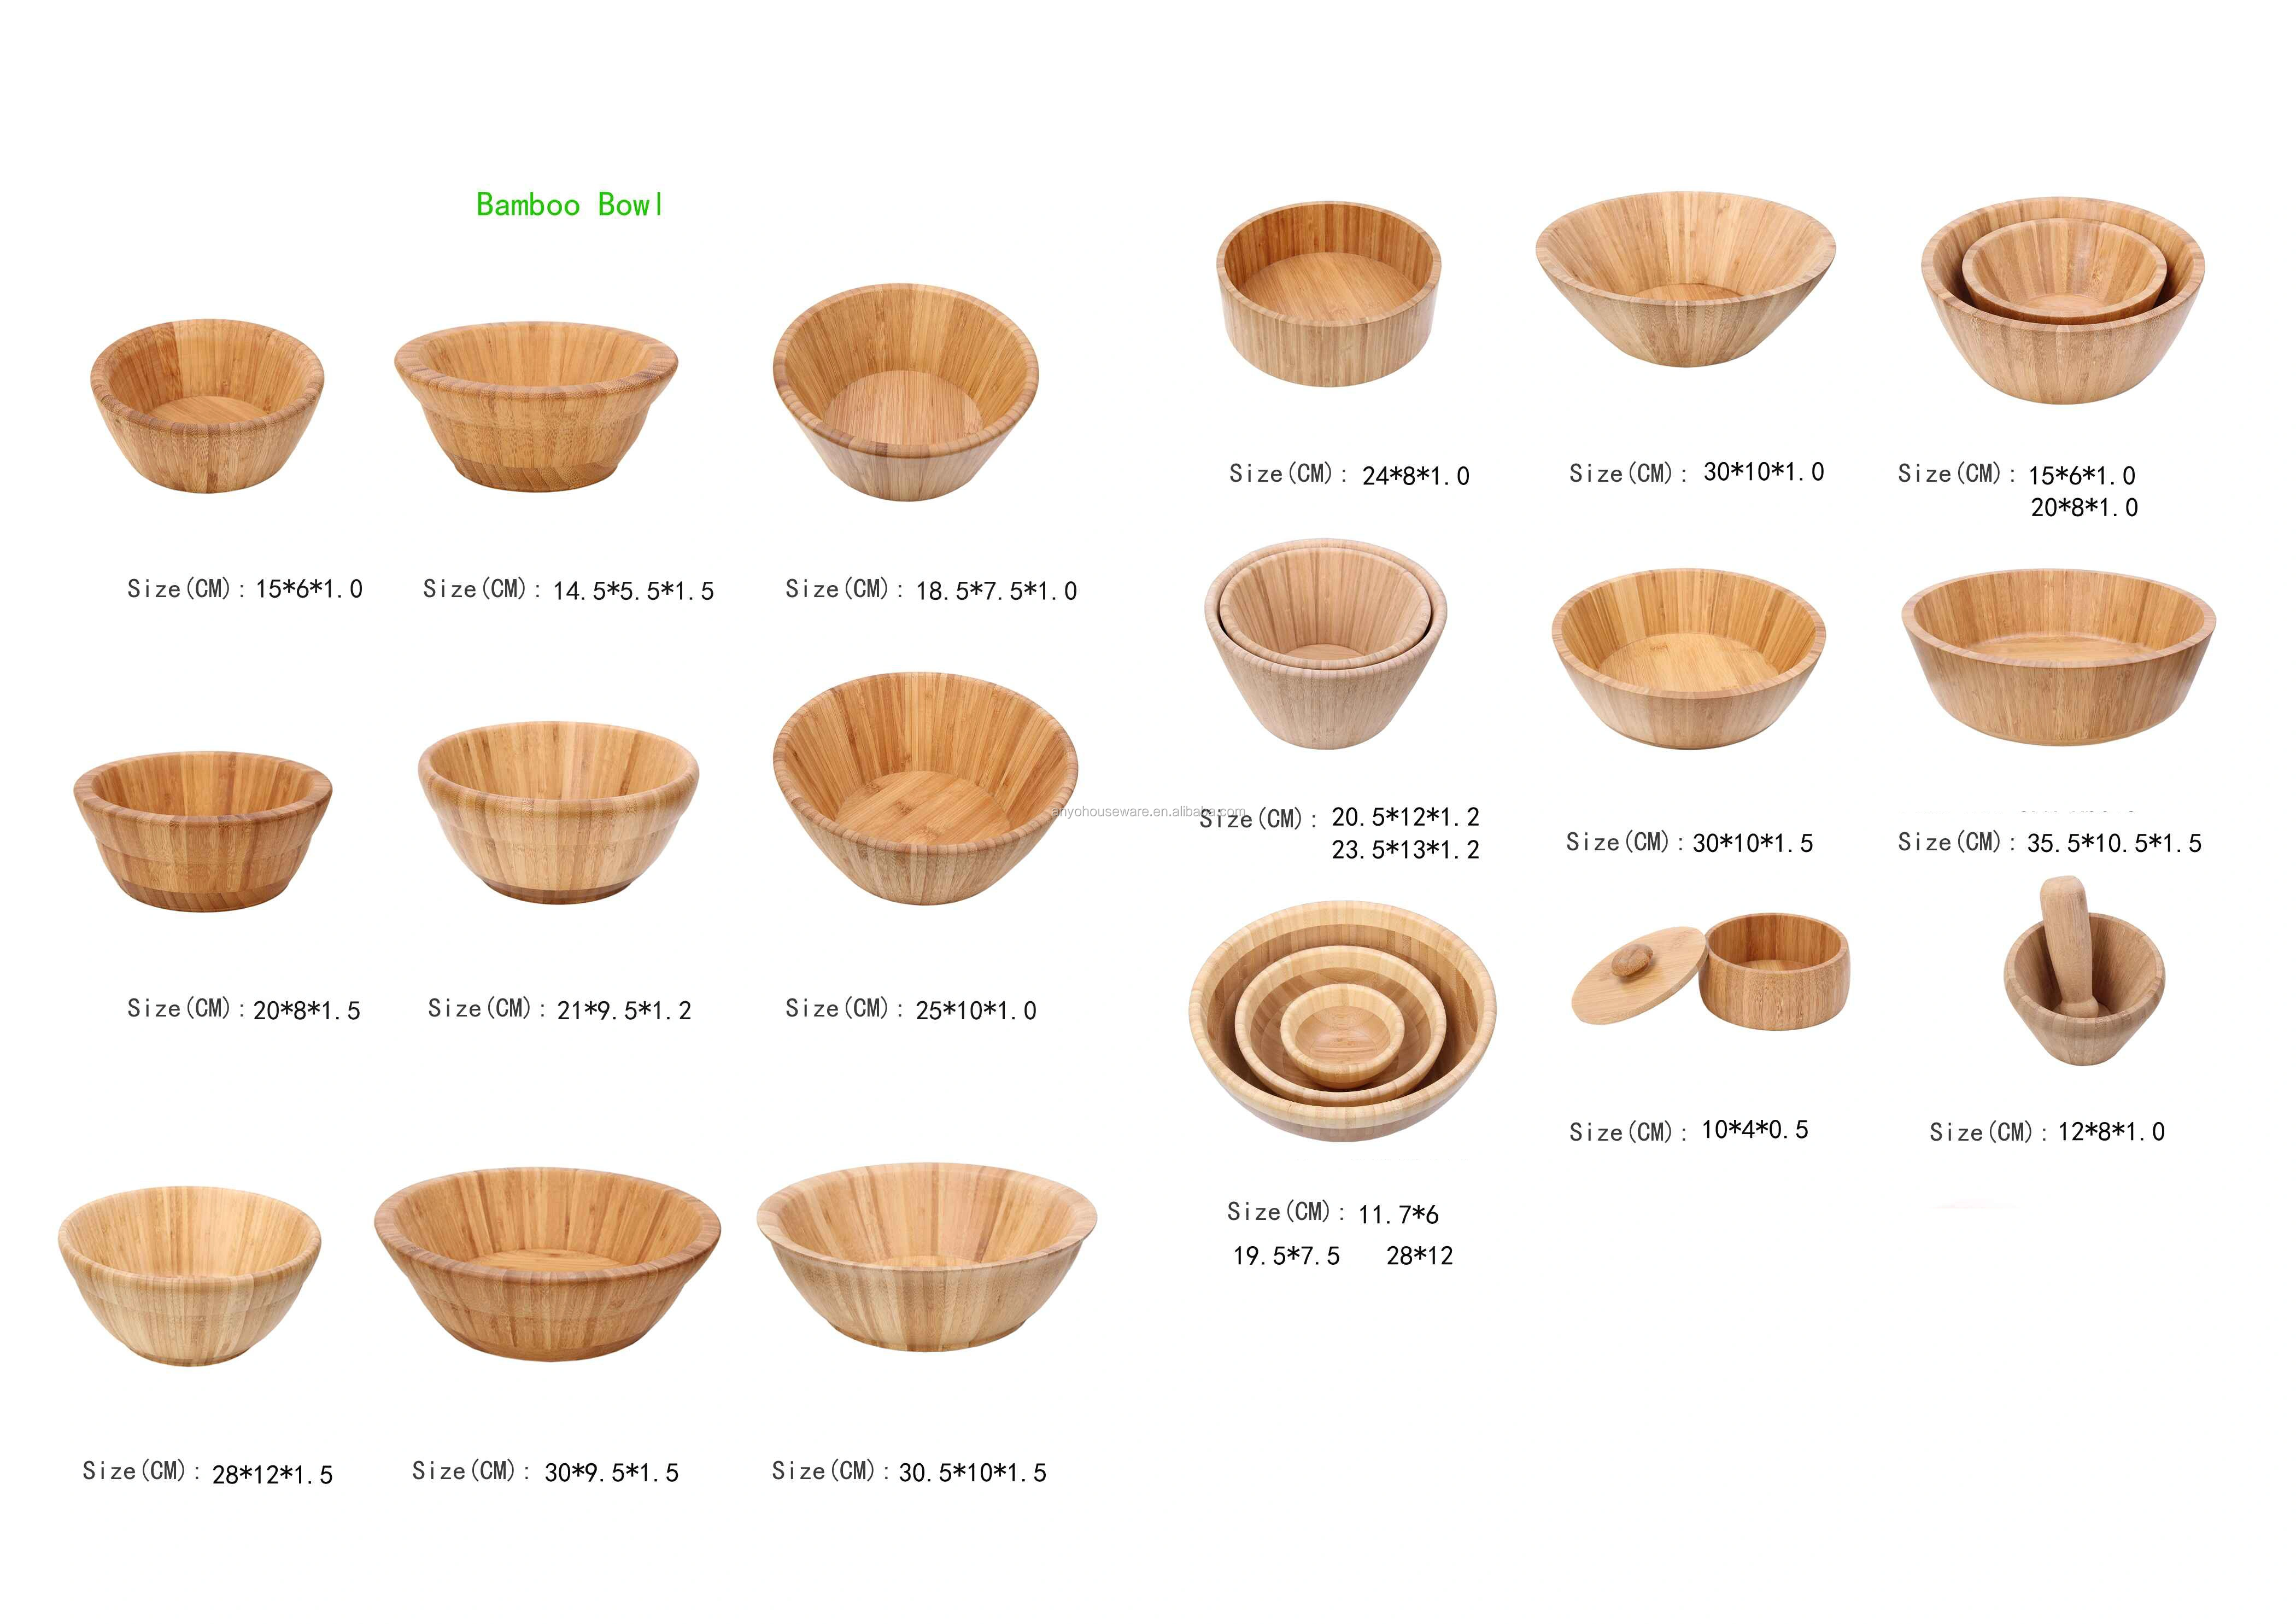 Wholesale 100% Natural Bamboo Serving Bowl for Salads, Fruit and Snacks